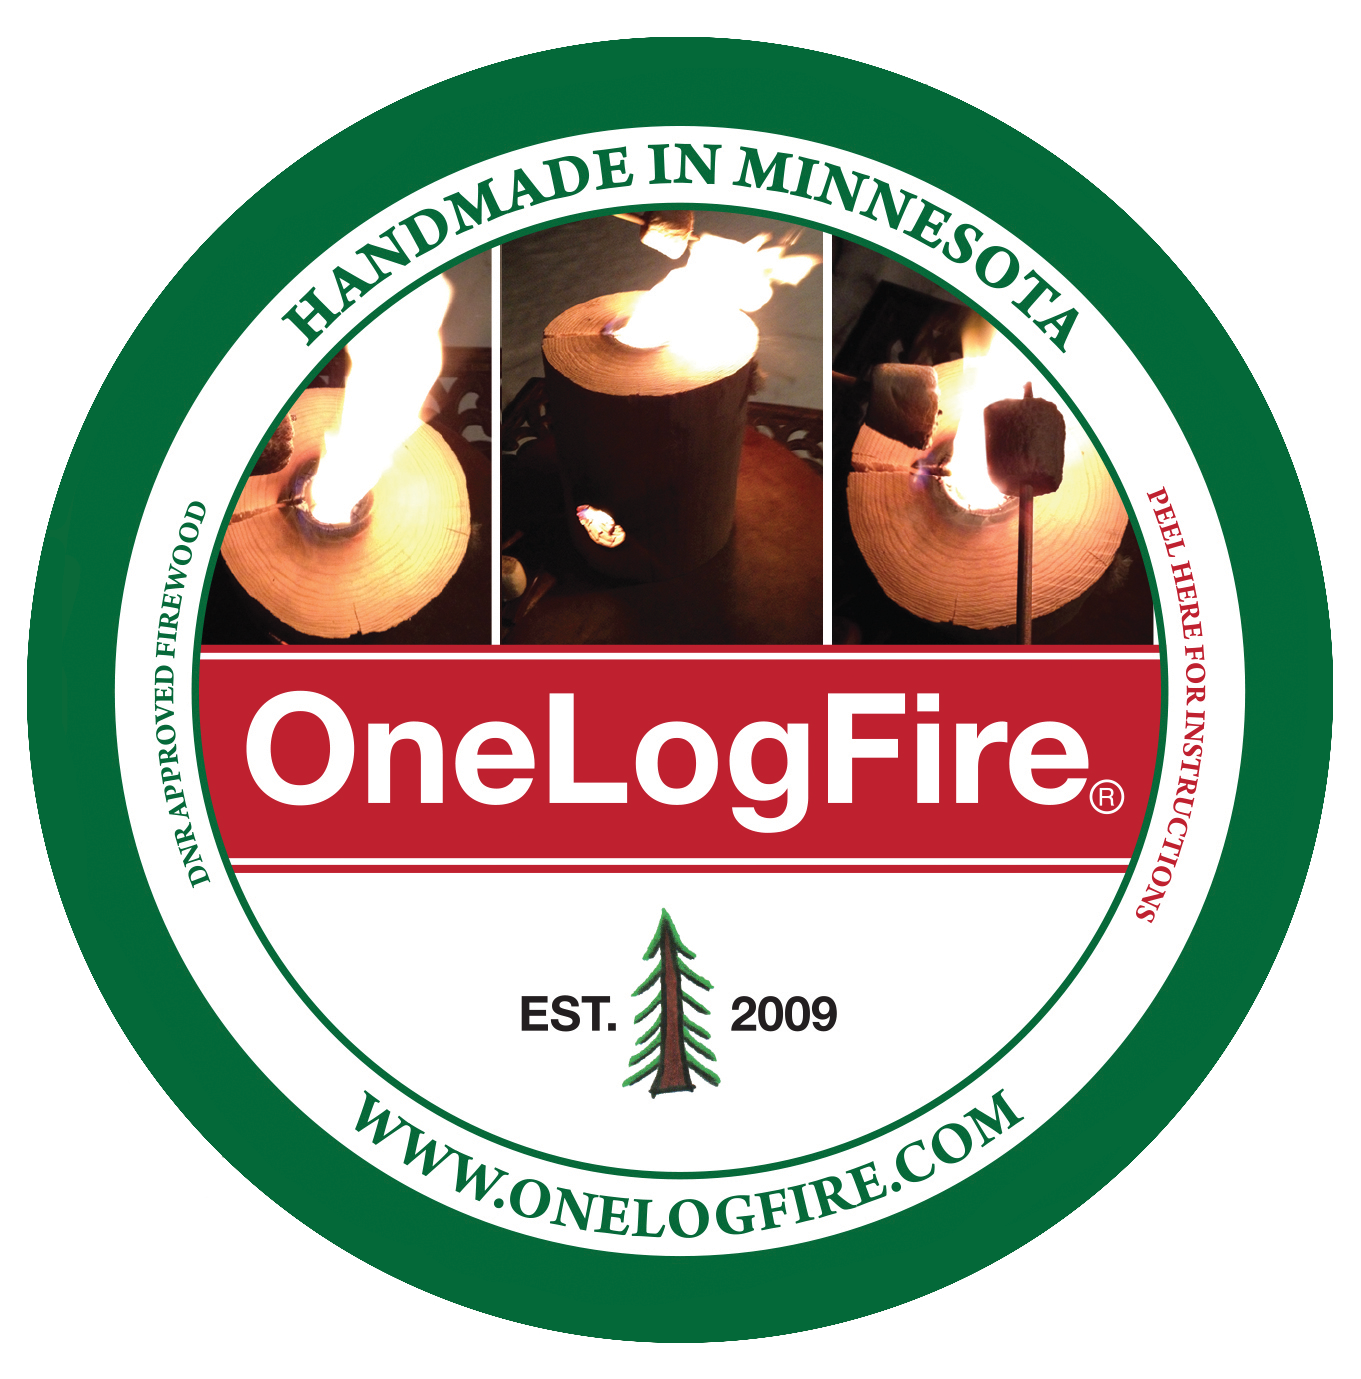 The World's Easiest Campfire | One Log Fire Kit | OneLogFire